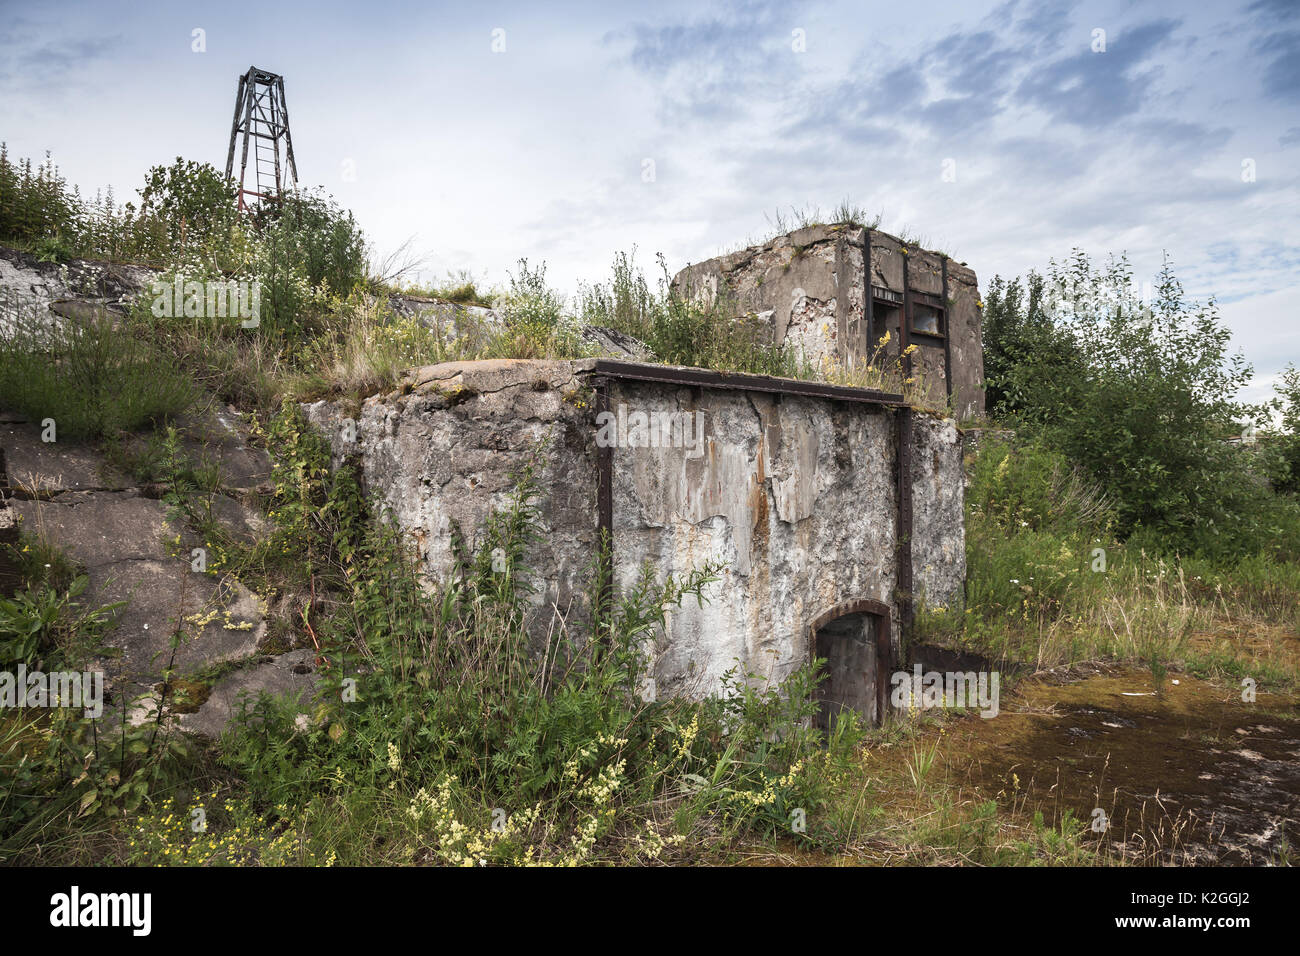 Old abandoned concrete bunker from WWII period on Totleben fort in Gulf of Finland near Saint-Petersburg in Russia Stock Photo